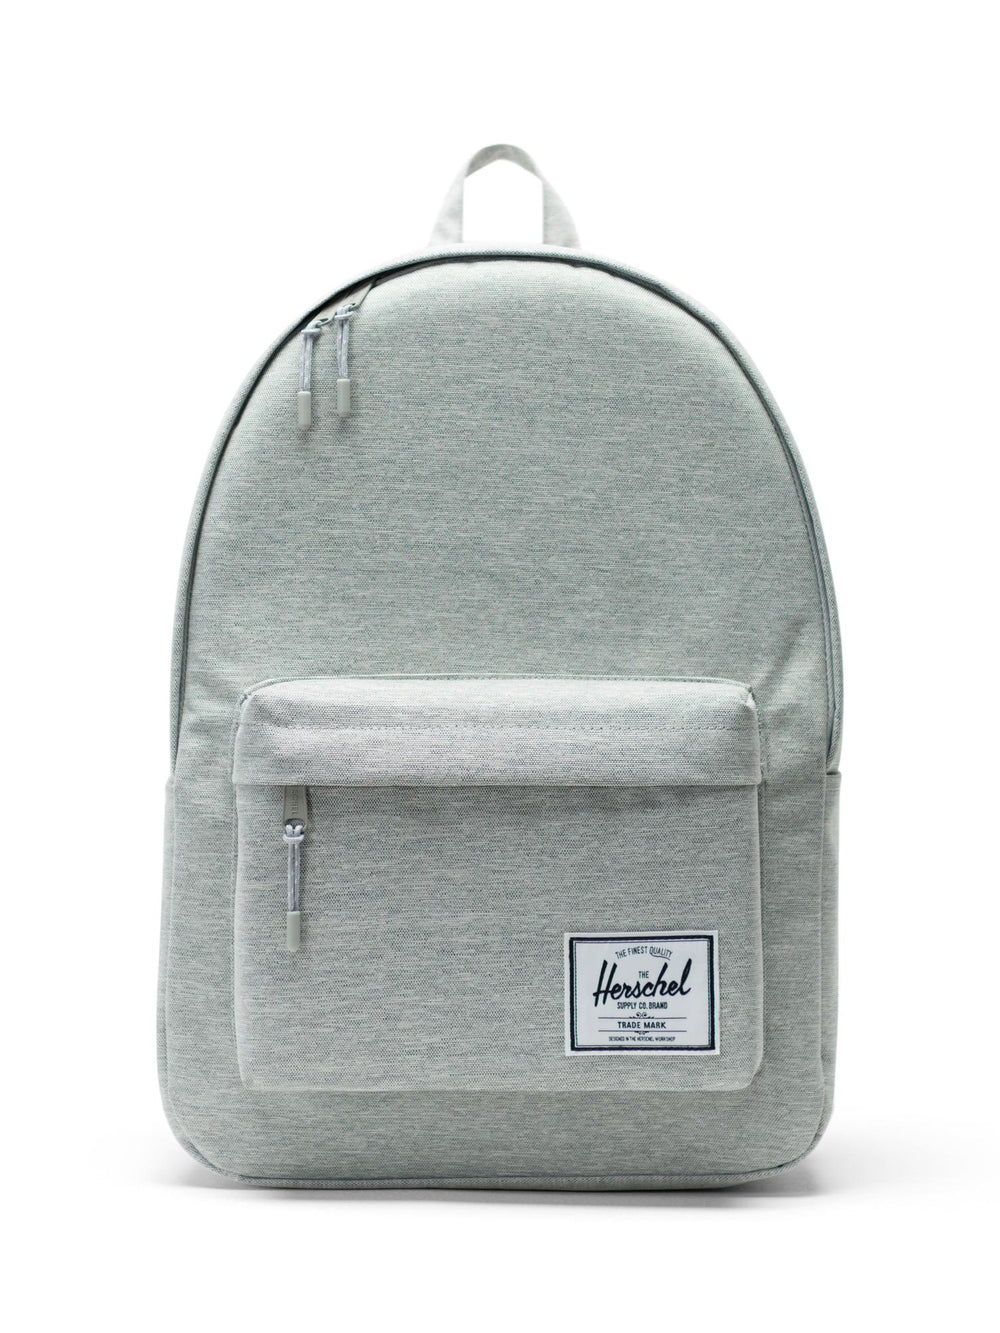 HERSCHEL SUPPLY CO. CLASSIC XLARGE 30L BACKPACK - DÉSTOCKAGE